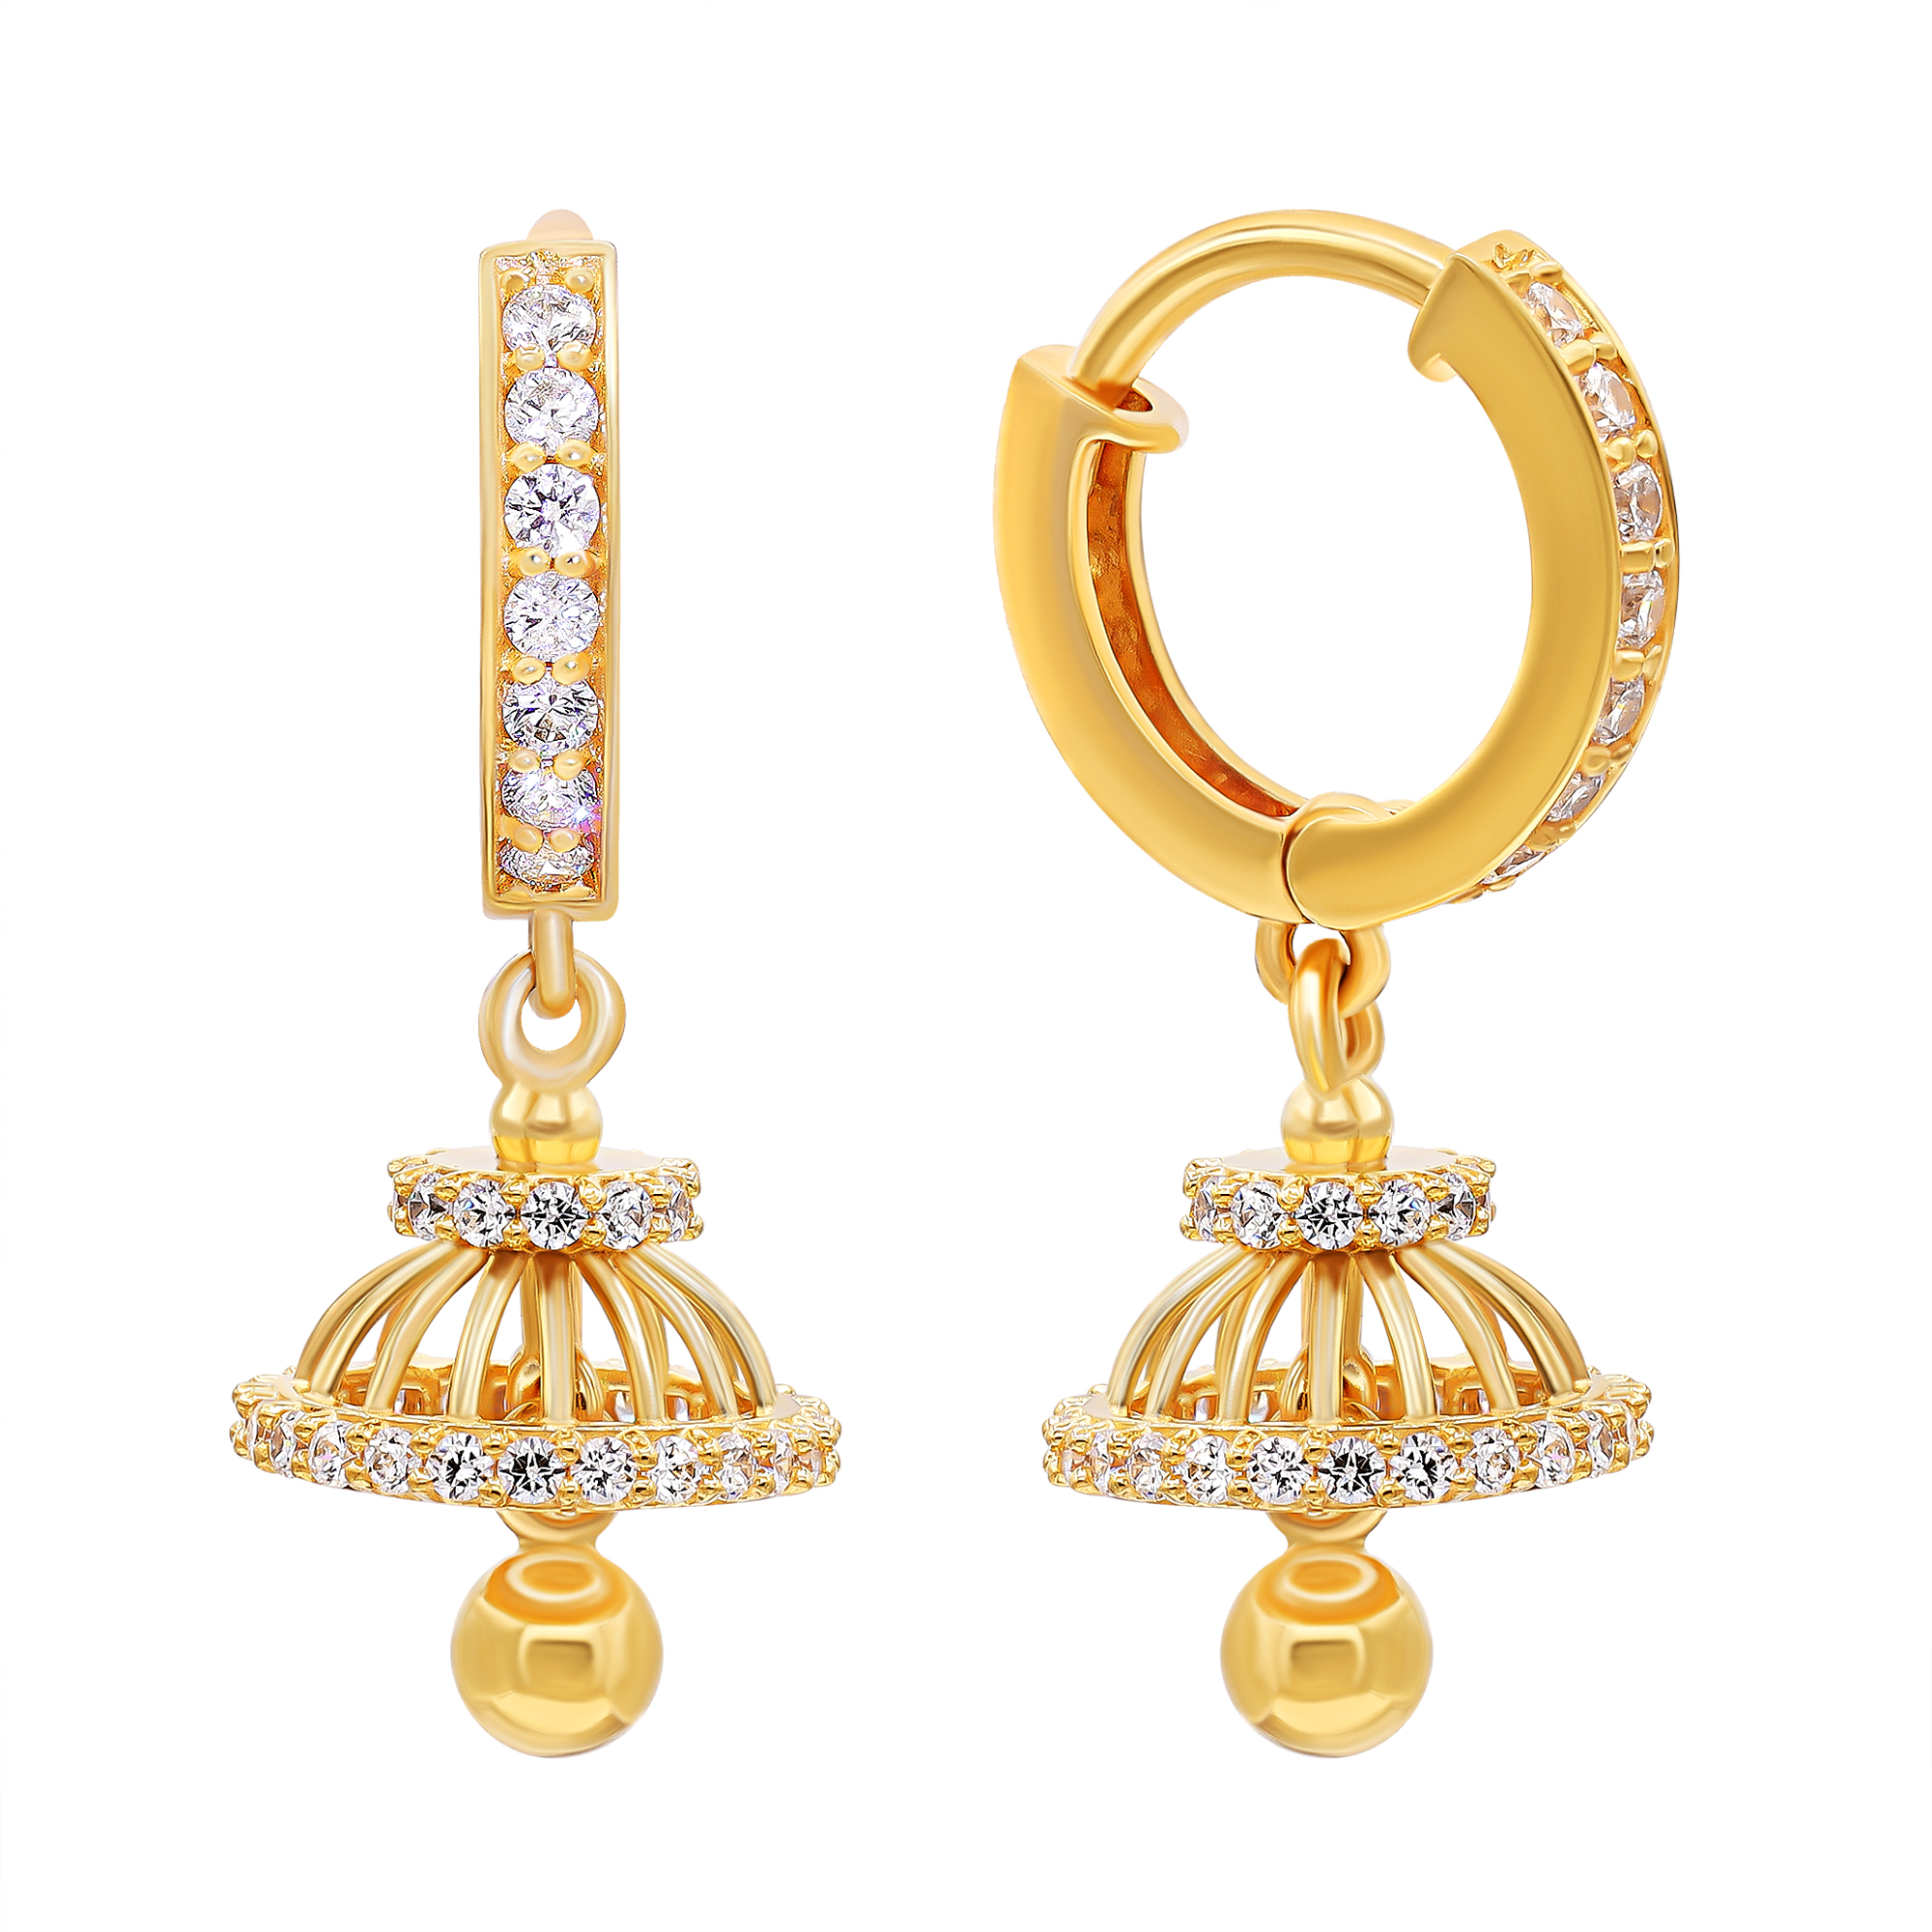 16 Stylish Jhumka Earrings to Give Your Bridal Trousseau a Signature Look